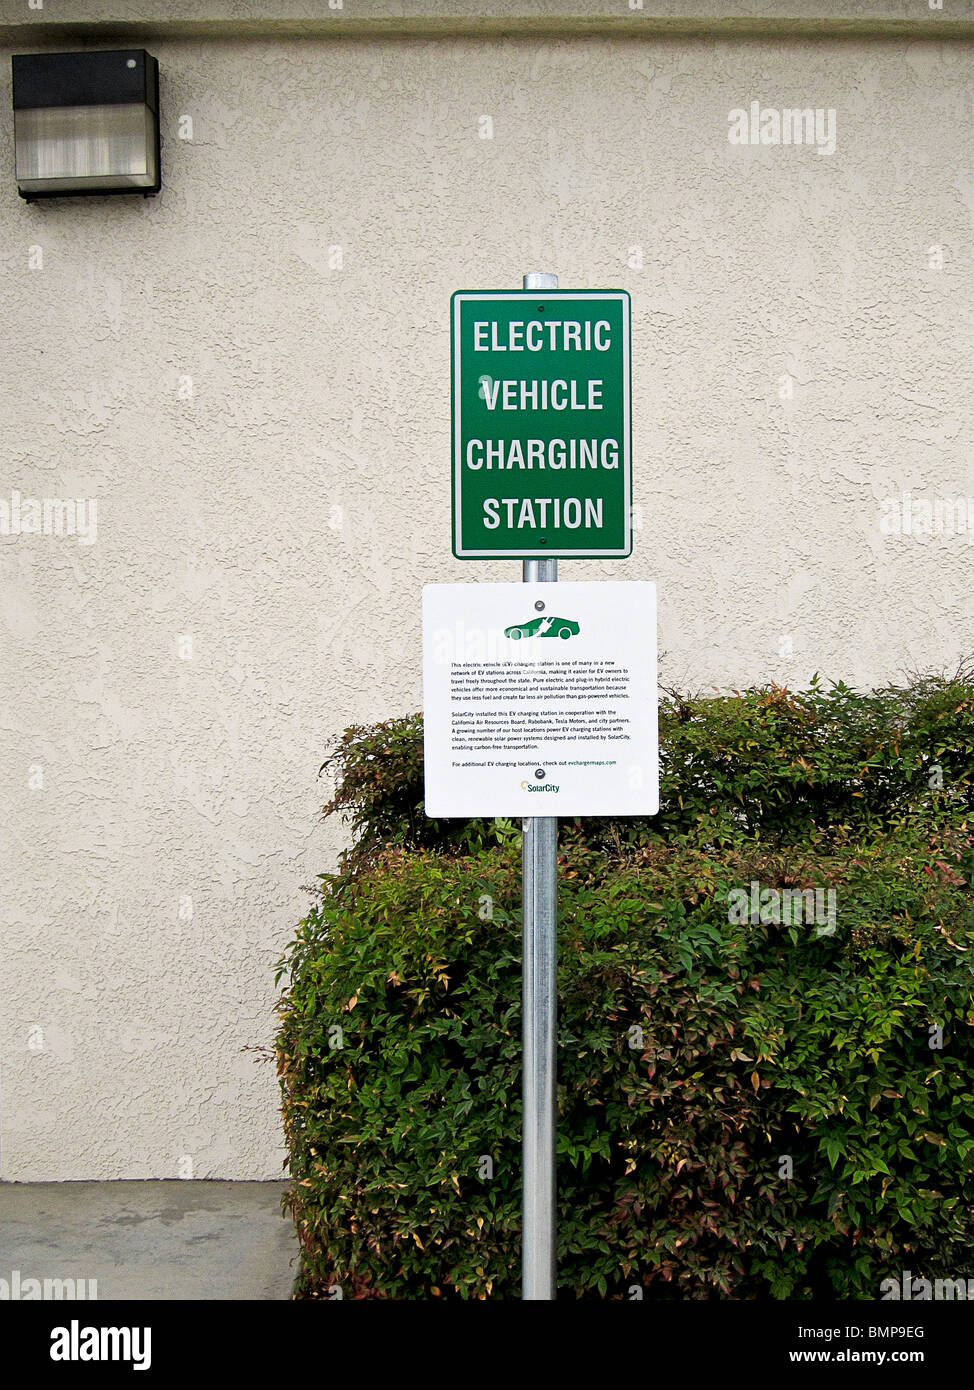 Charging station sign for electric vehicles, bank parking lot, Oxnard, California. Stock Photo